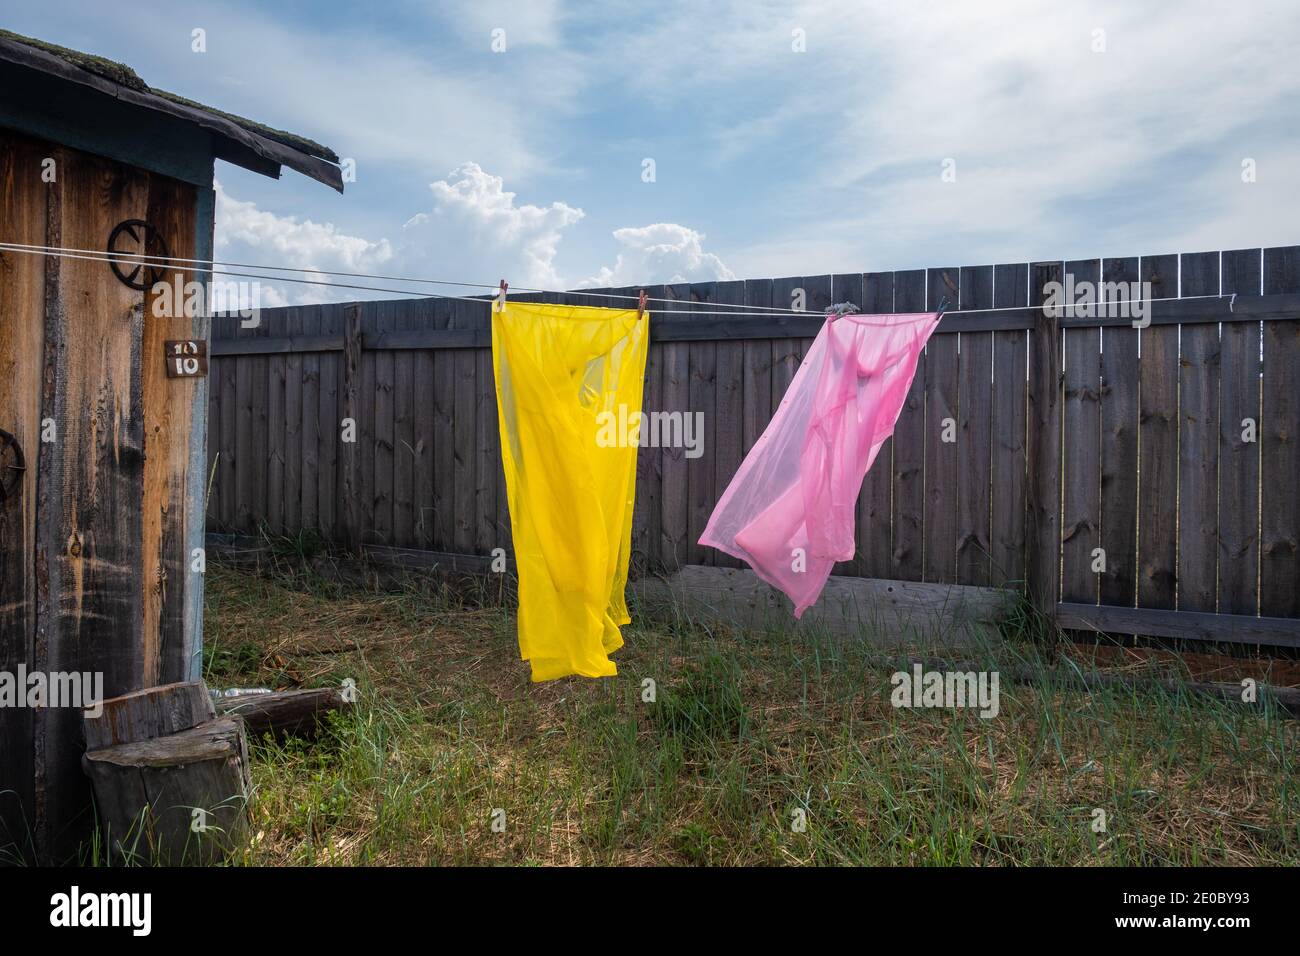 Clean clothes are dried on a rope. Two raincoats of pink and yellow colors are fluttering in the wind in the yard against the background of the fence. Stock Photo